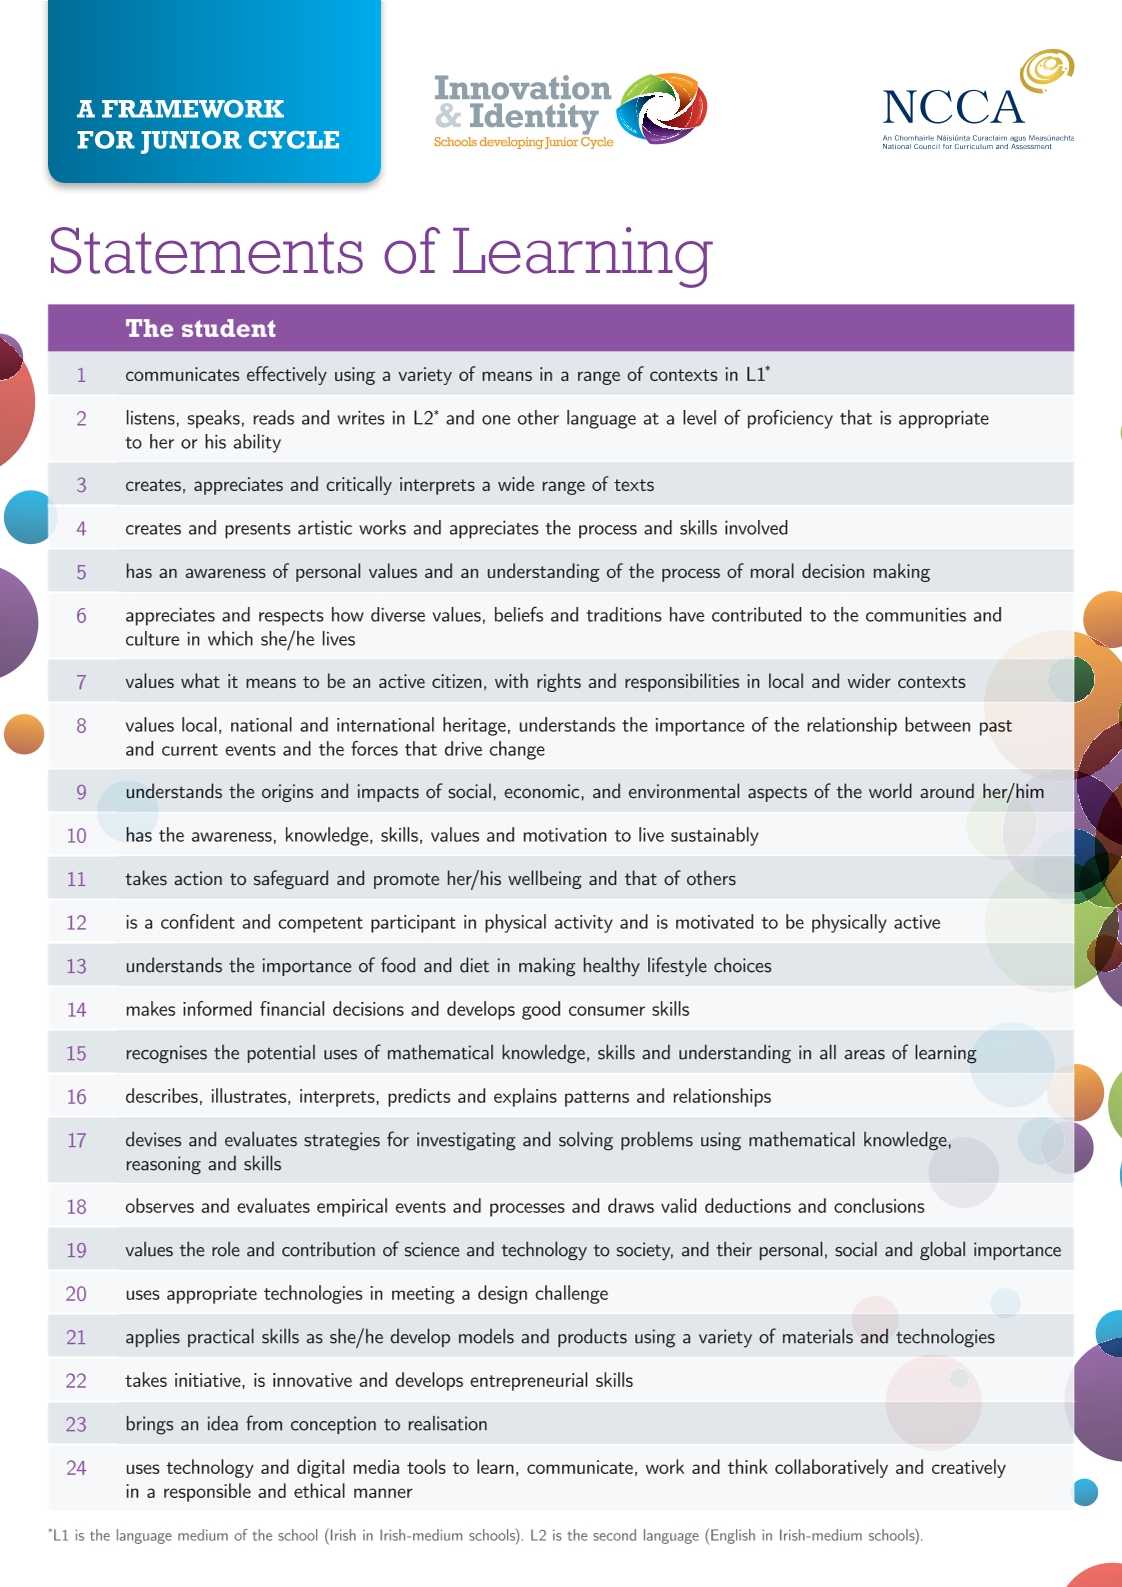 Statements of Learning